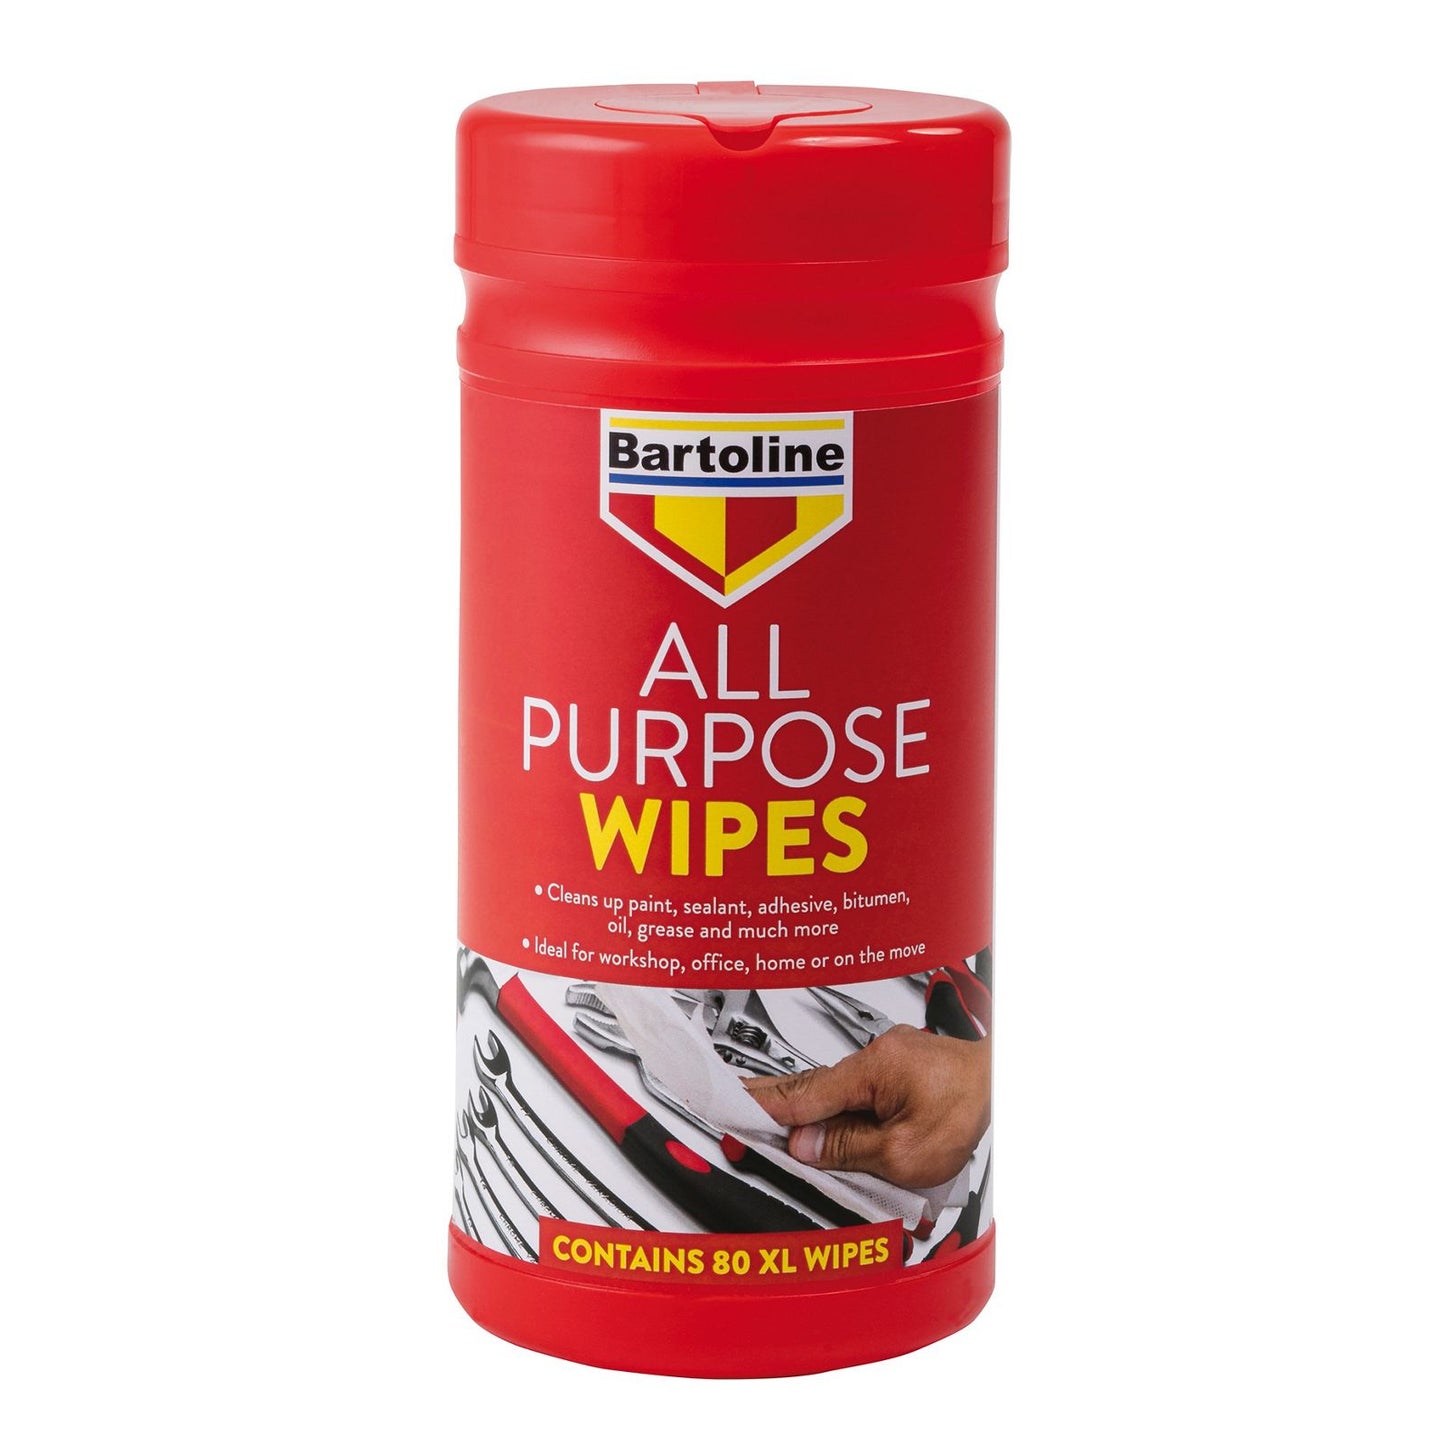 All Purpose Wipes 80 XL